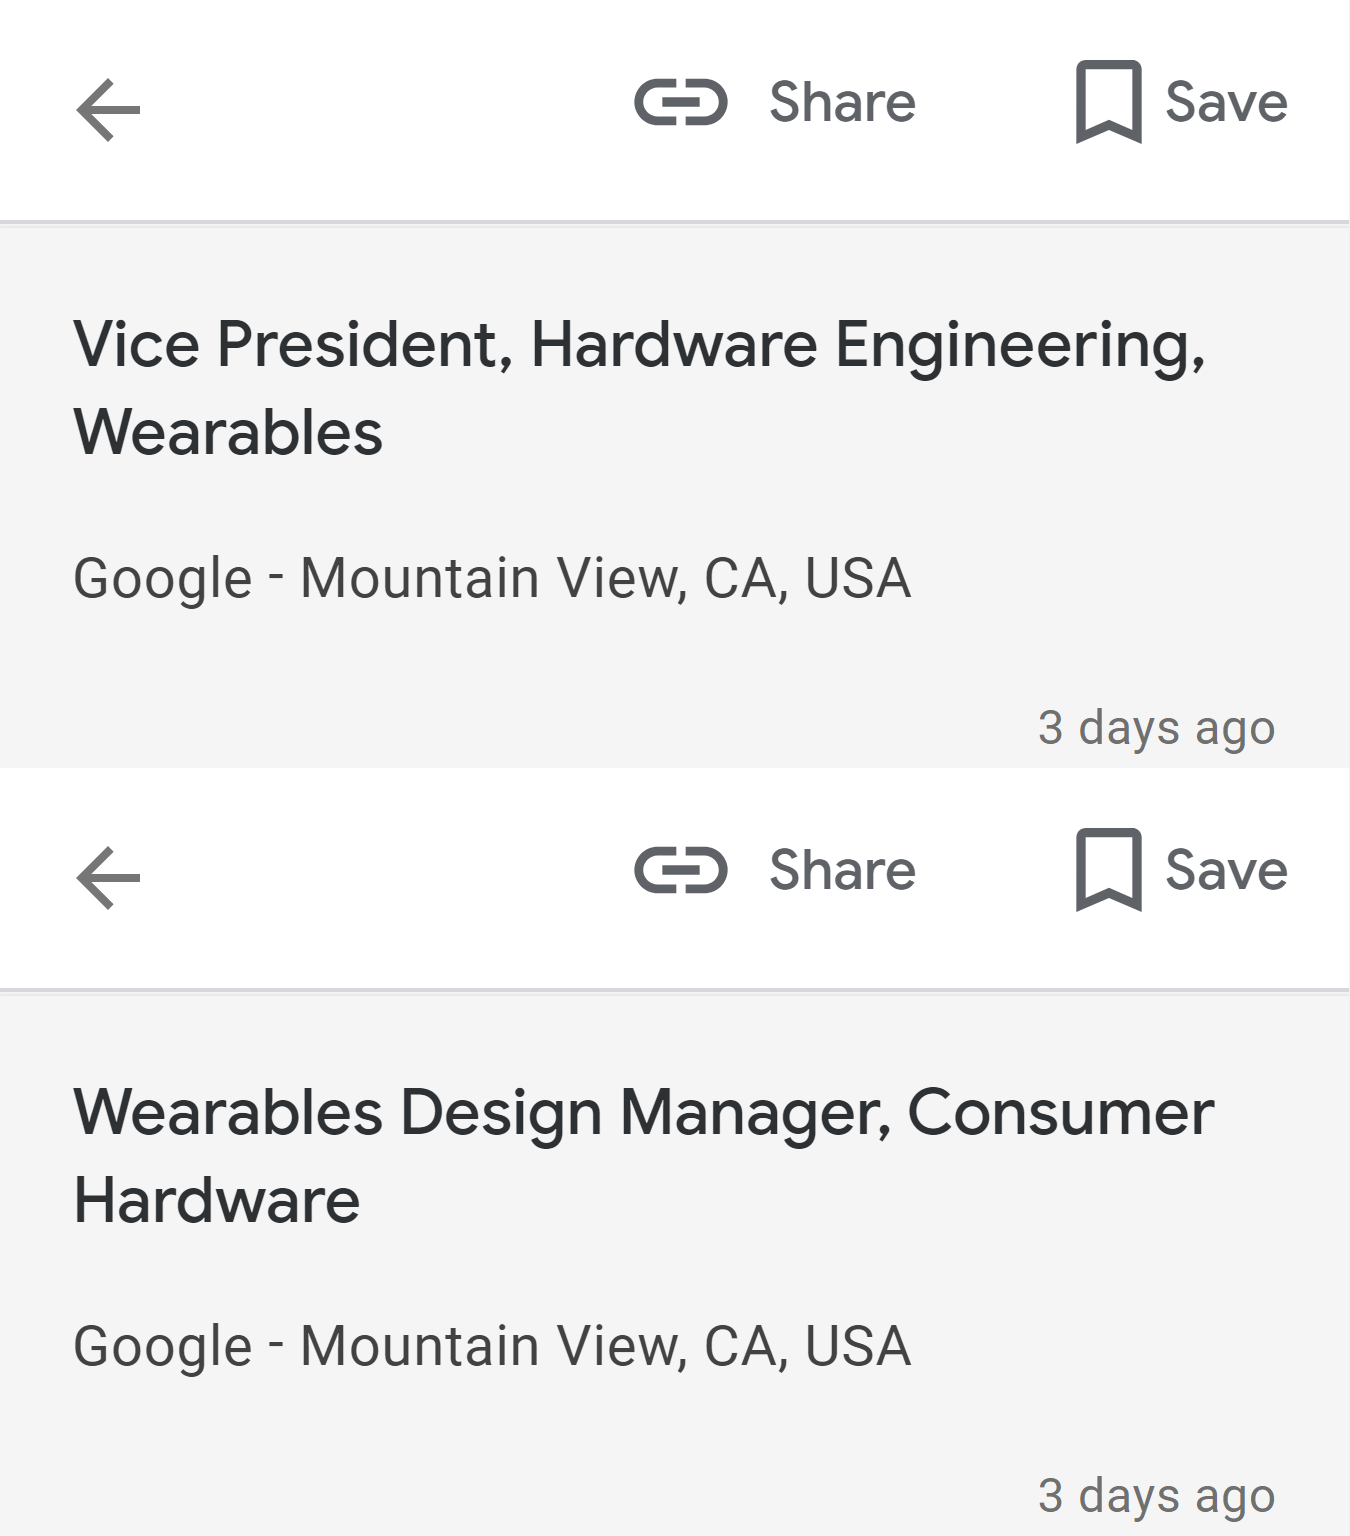 tinhte_google_vp_engineering_wearables_vacant (1).png